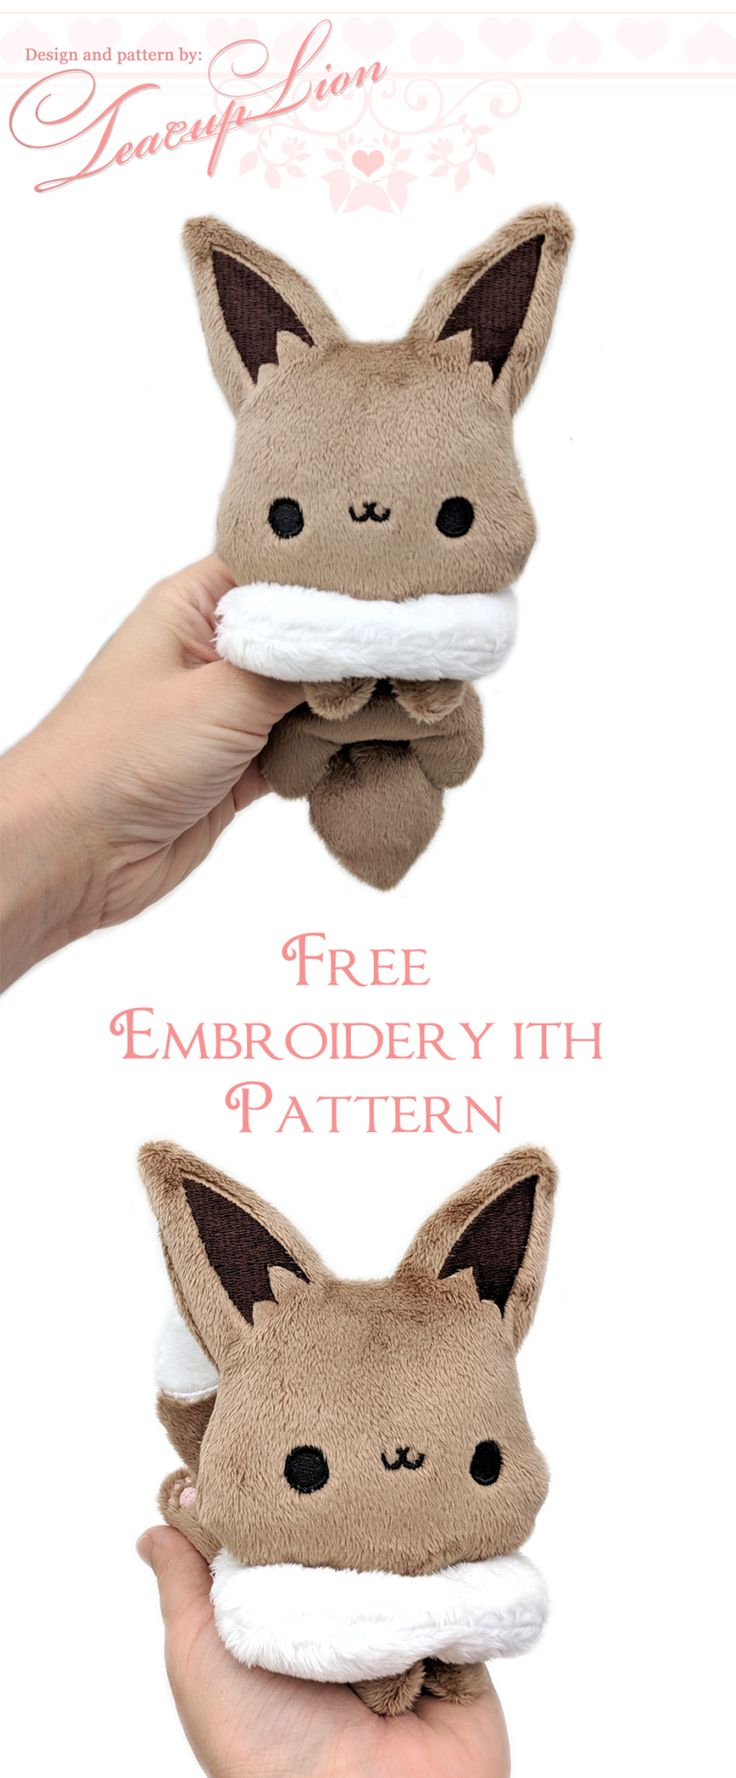 Machine Embroidery Patterns Free Knitting Patterns Christmas Free Eevee Plushie Sewing Pattern And